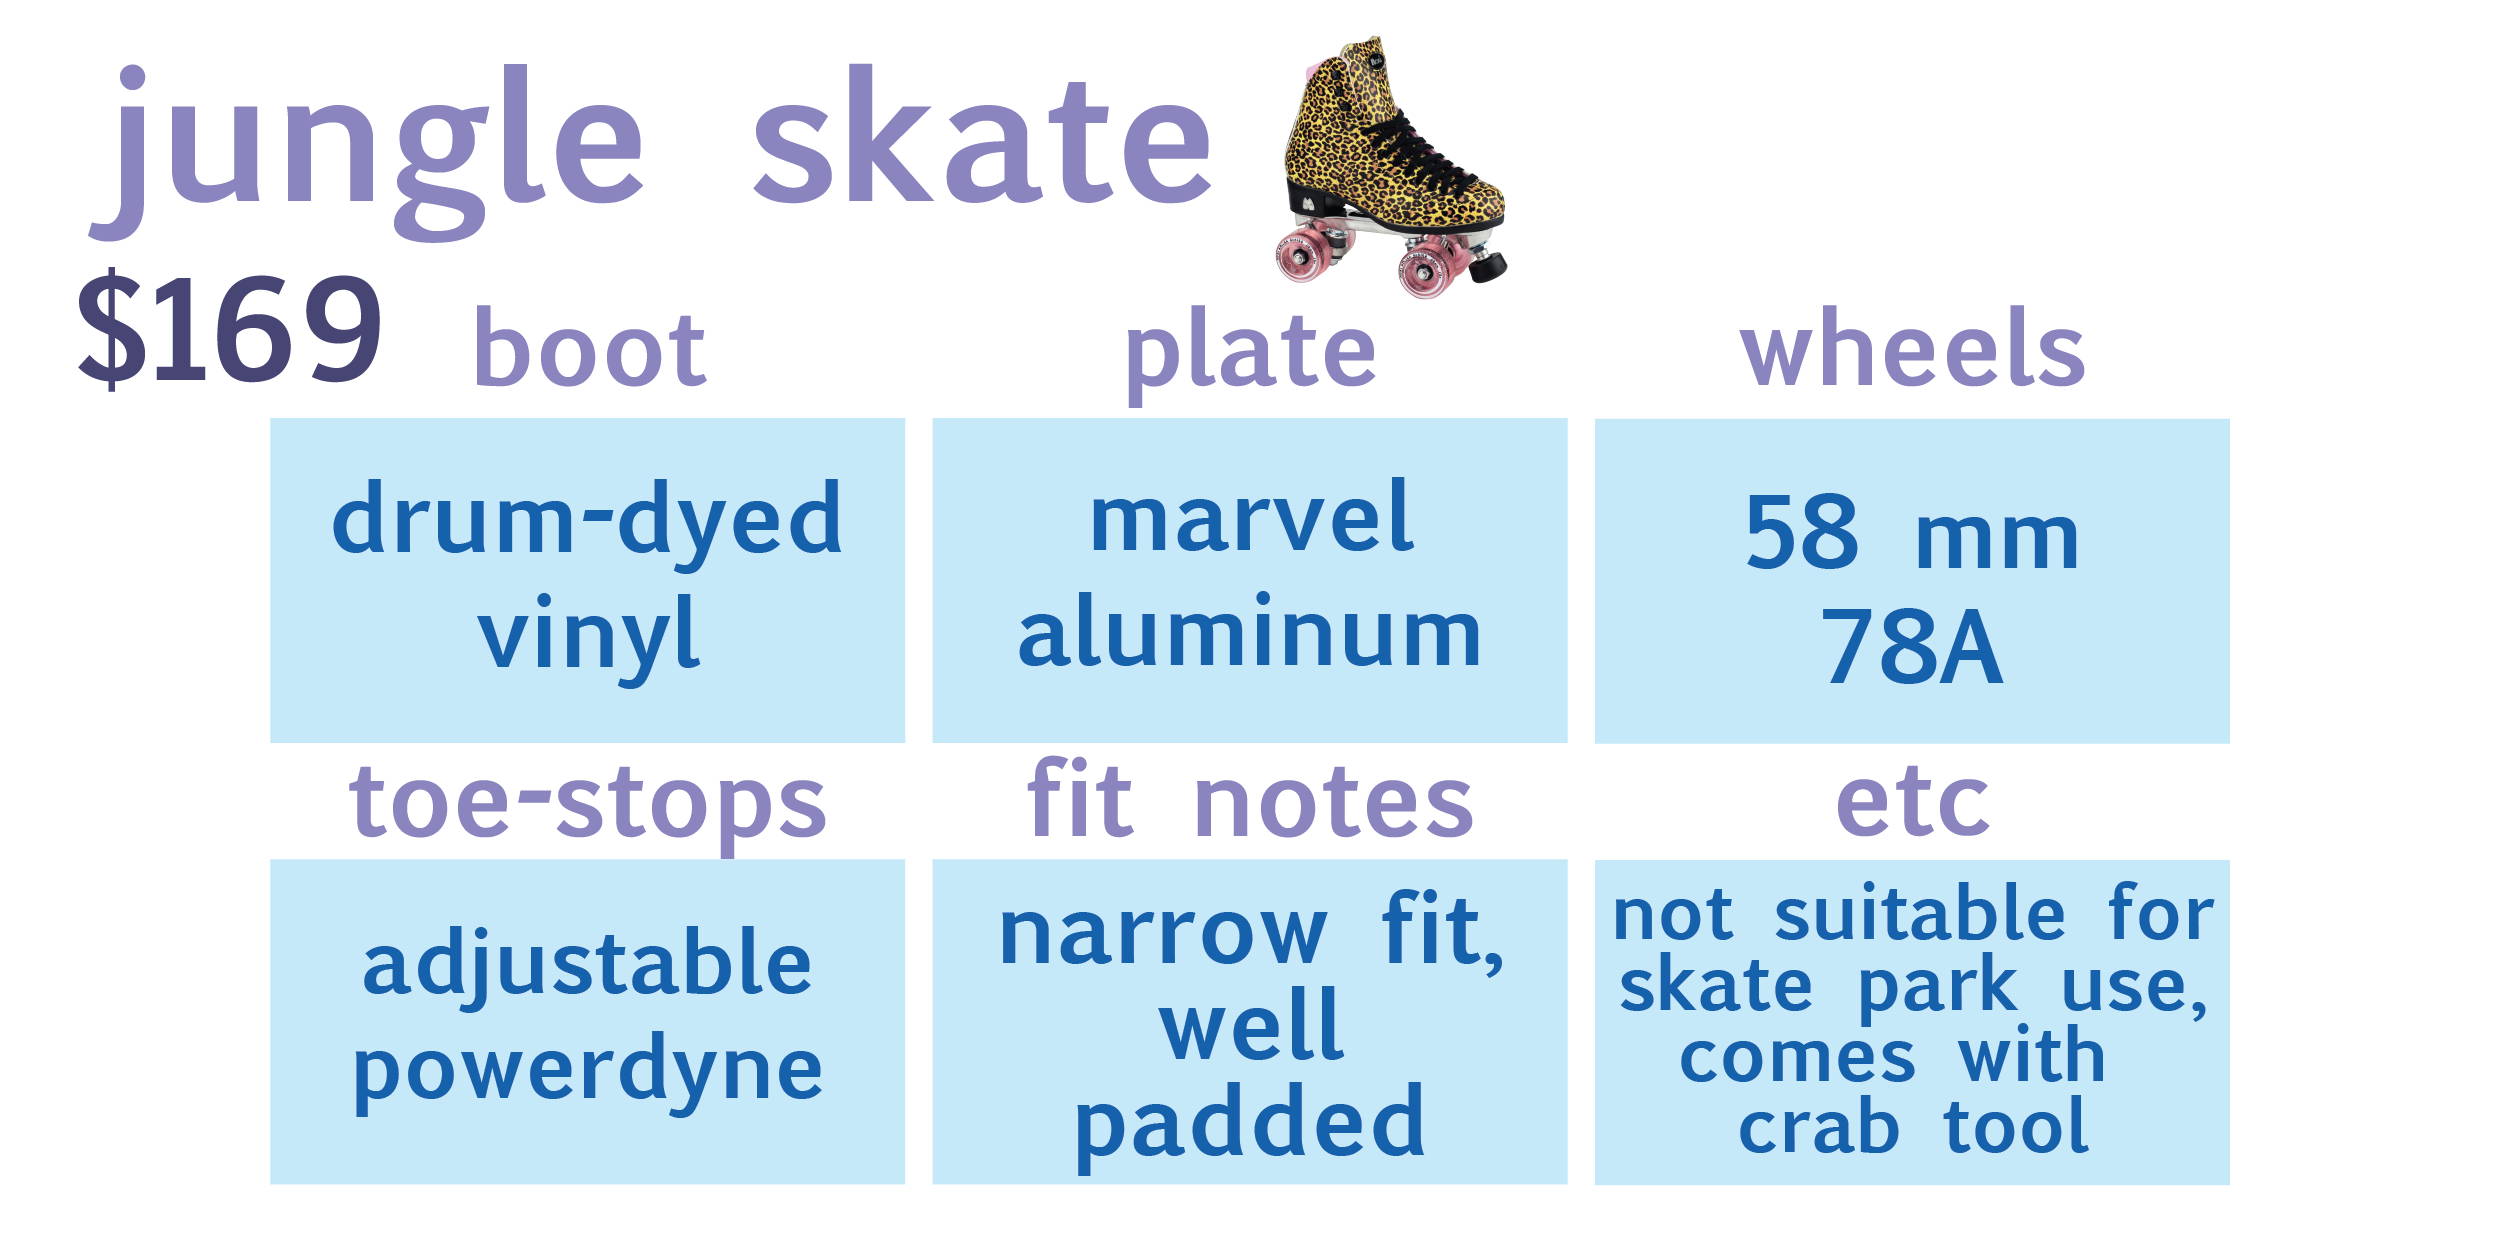 table of jungle roller skate information with photo of the cheetah print jungle roller skate:  boot: drum dyed vinyl, plate: marvel aluminum, wheels: 58mm, 78A, toe-stops: adjustable powerdyne, fit notes: narrow fit, well padded